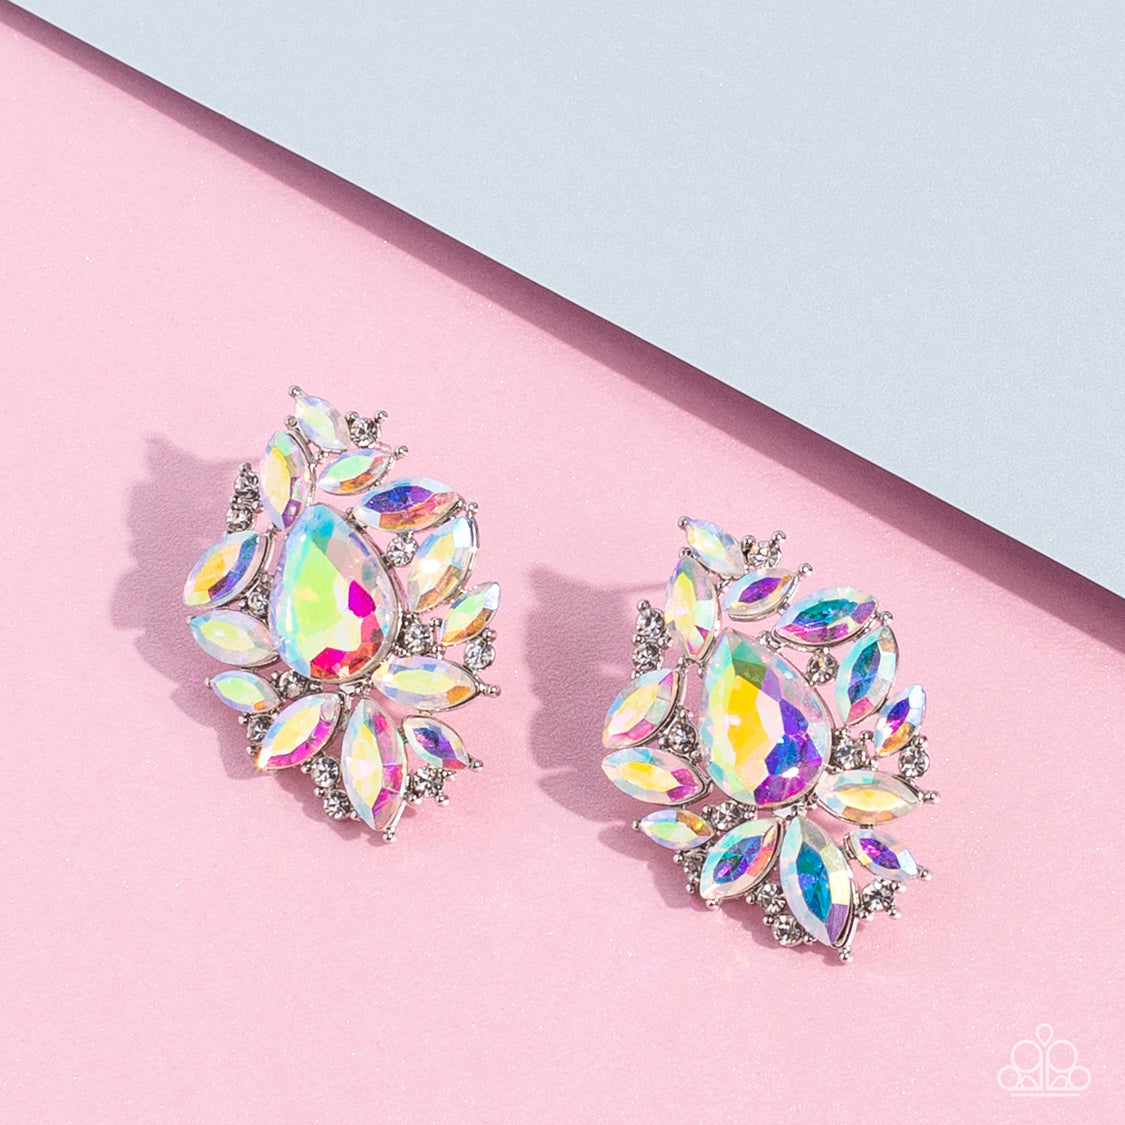 We All Scream for Ice QUEEN - Multi Earrings - Princess Glam Shop